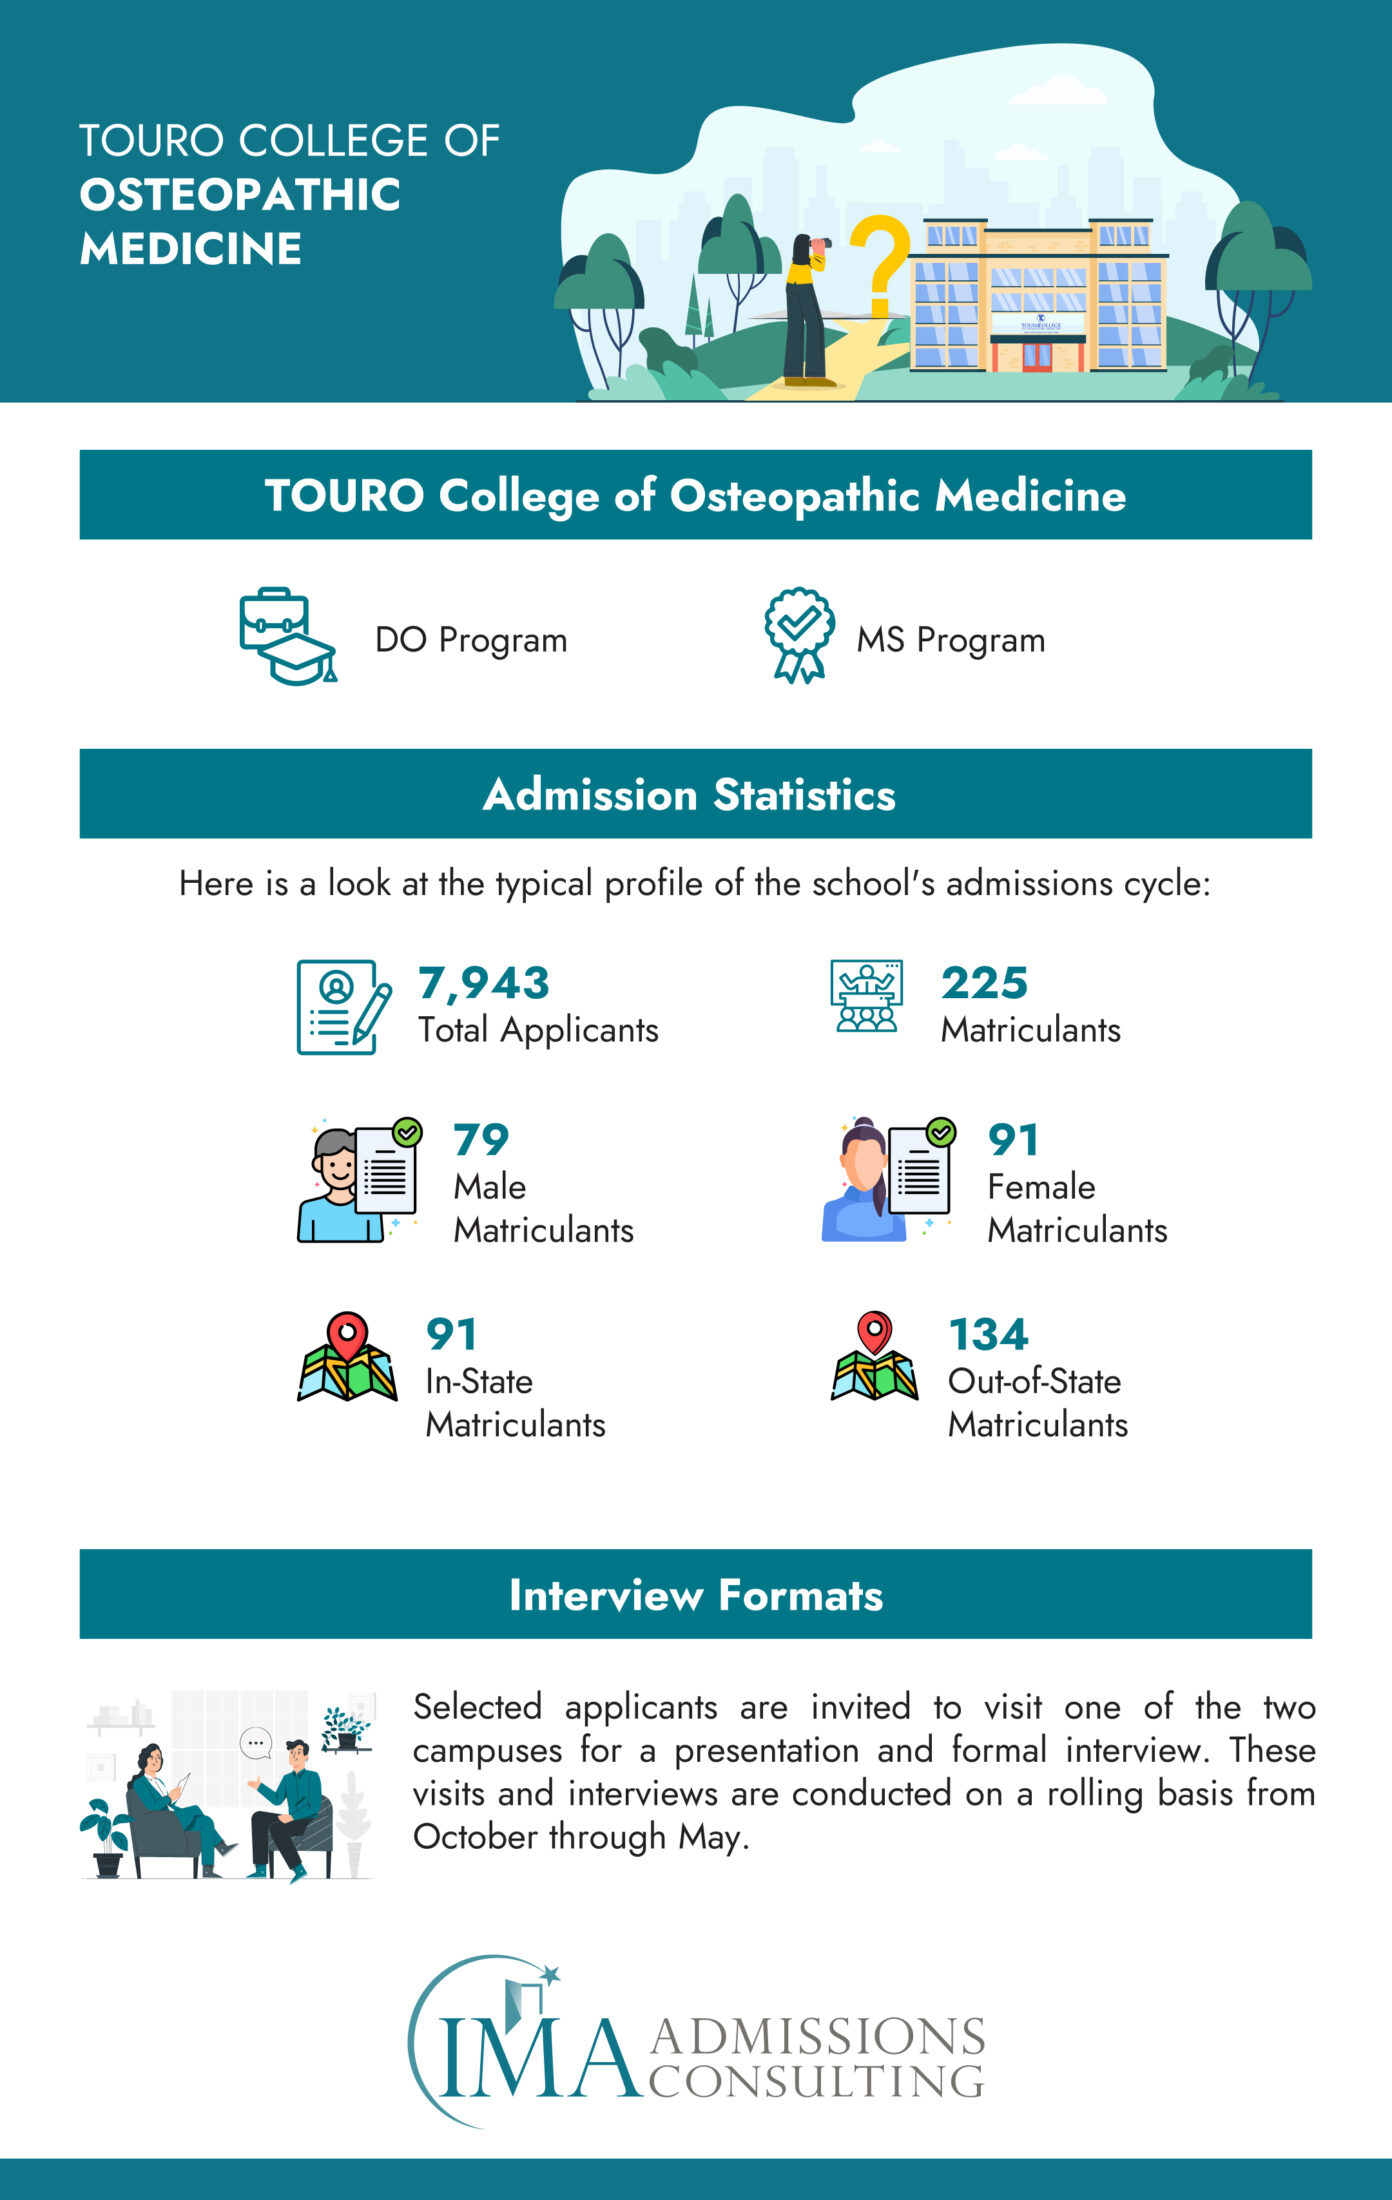 TOURO College of Osteopathic Medicine - Acceptance Rate and Admissions Stats